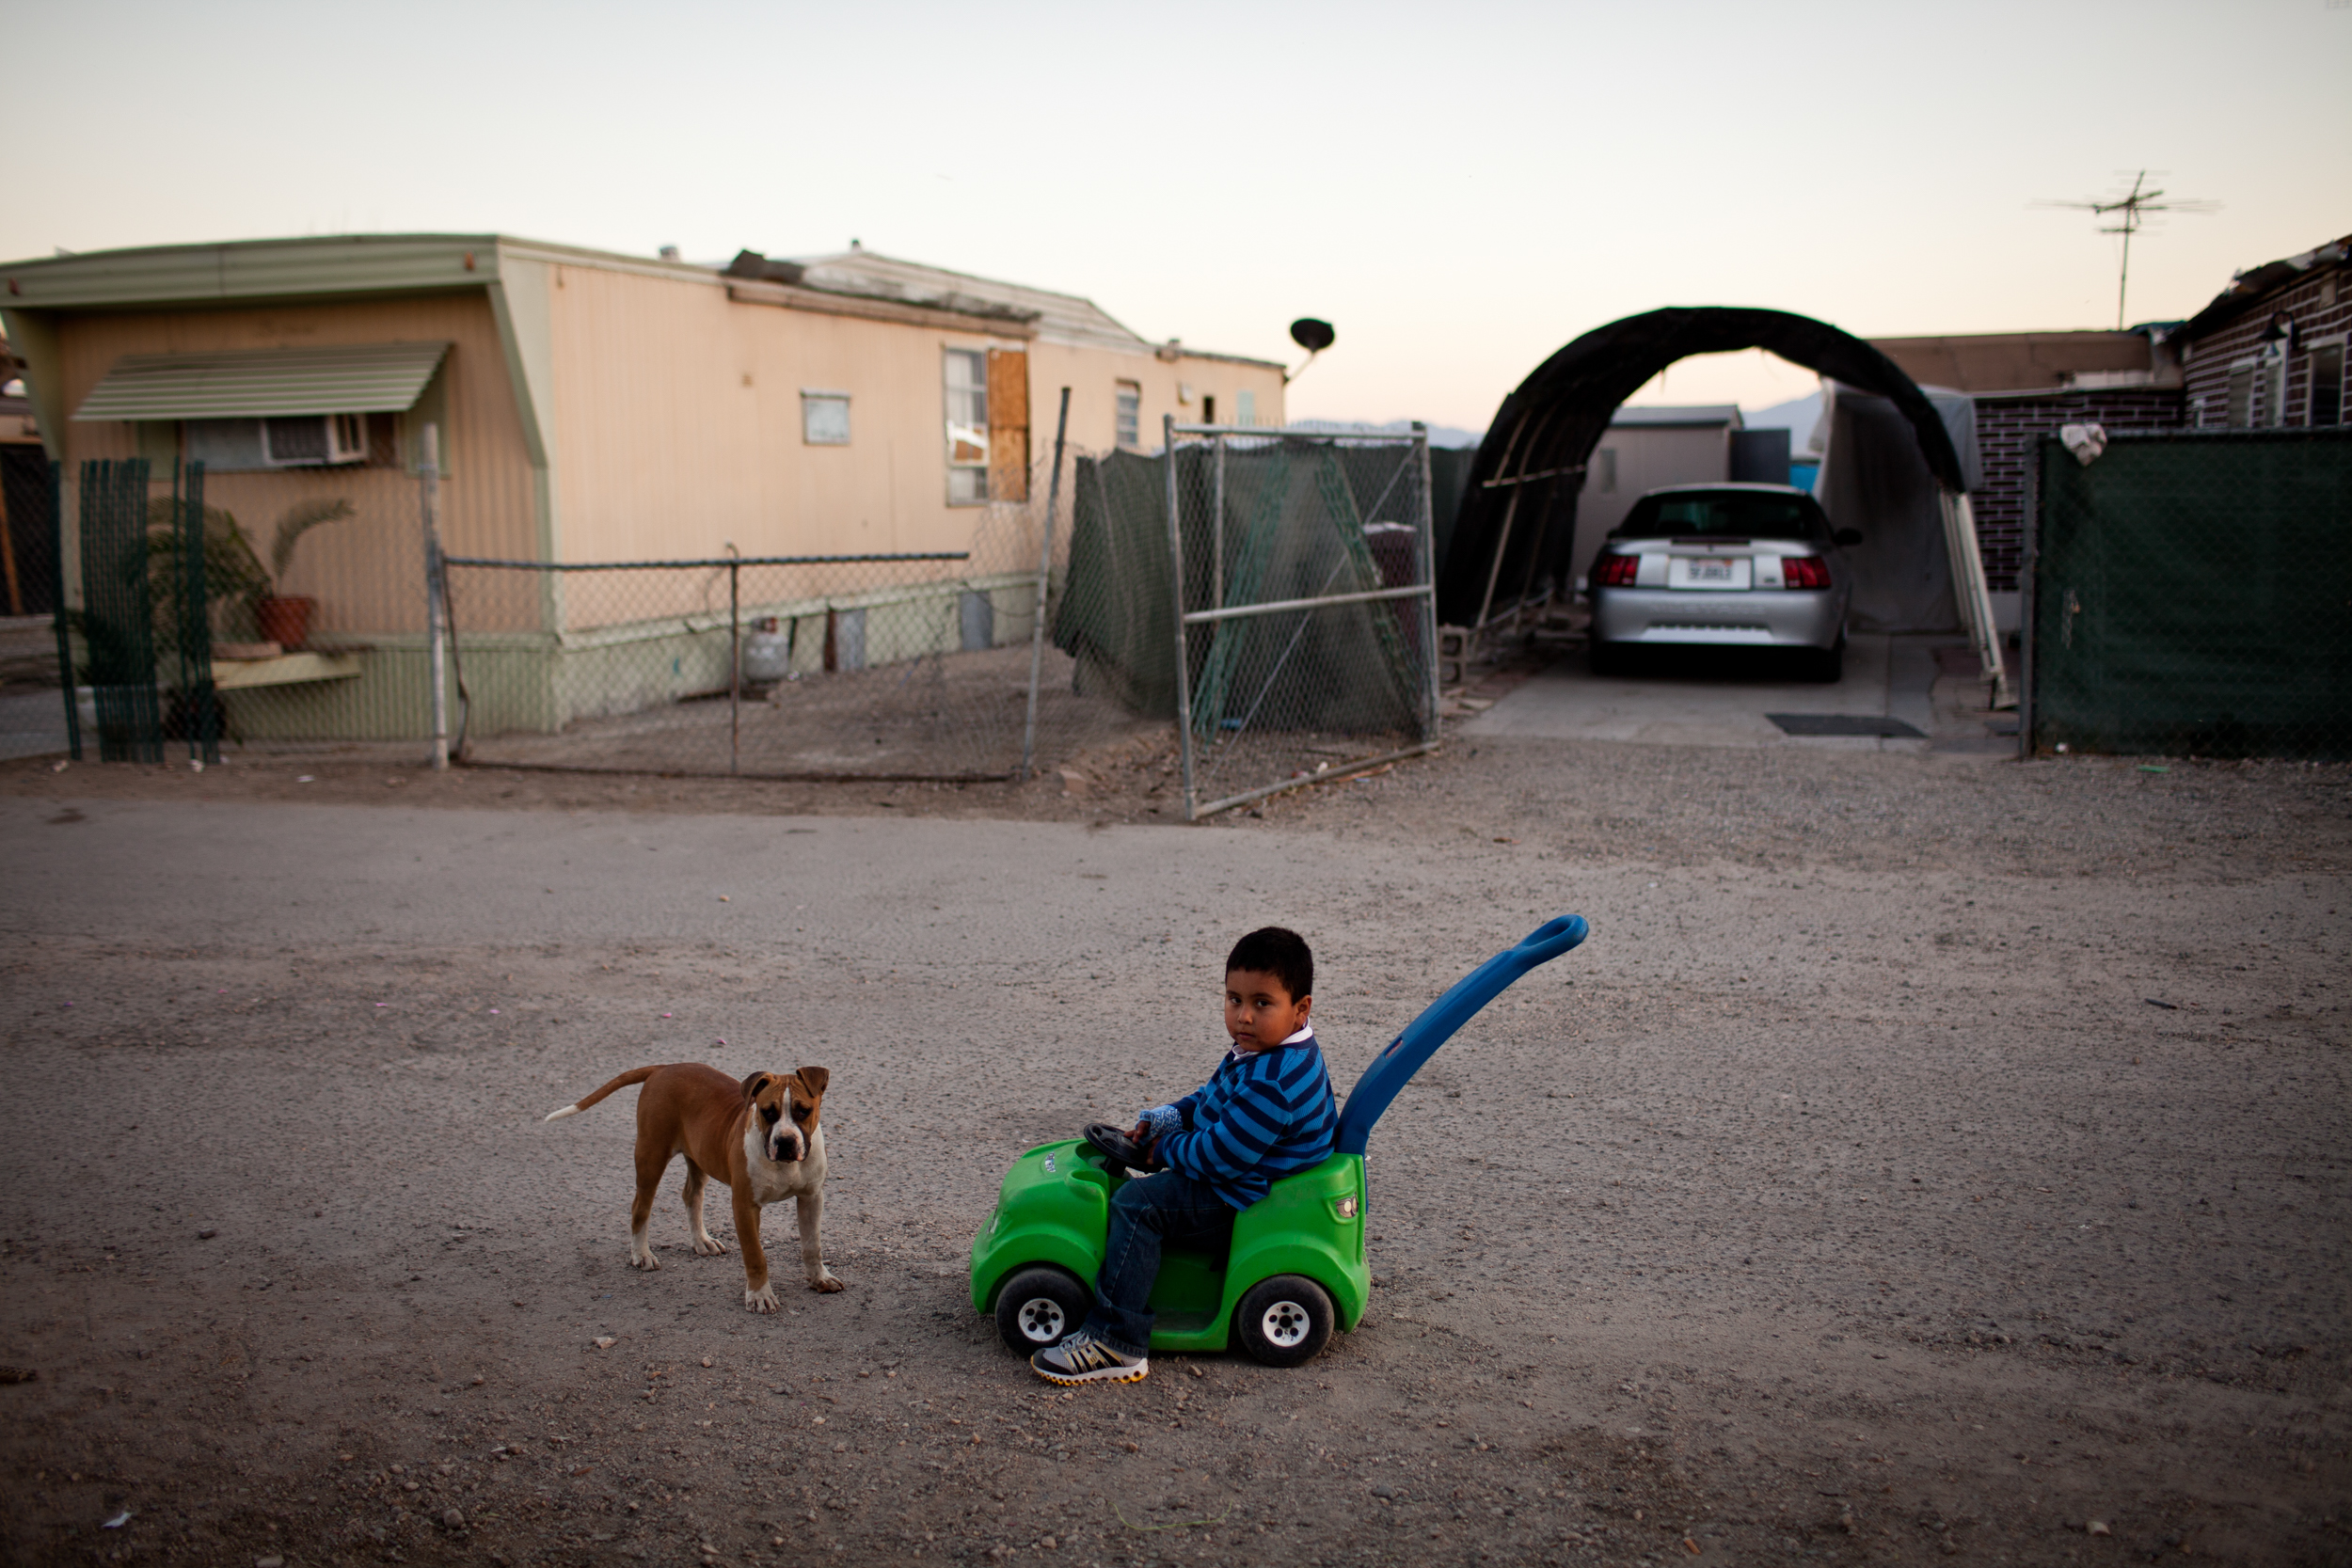  A three-year-old boy plays in the Rancho Garcia trailer park in Thermal, California. 